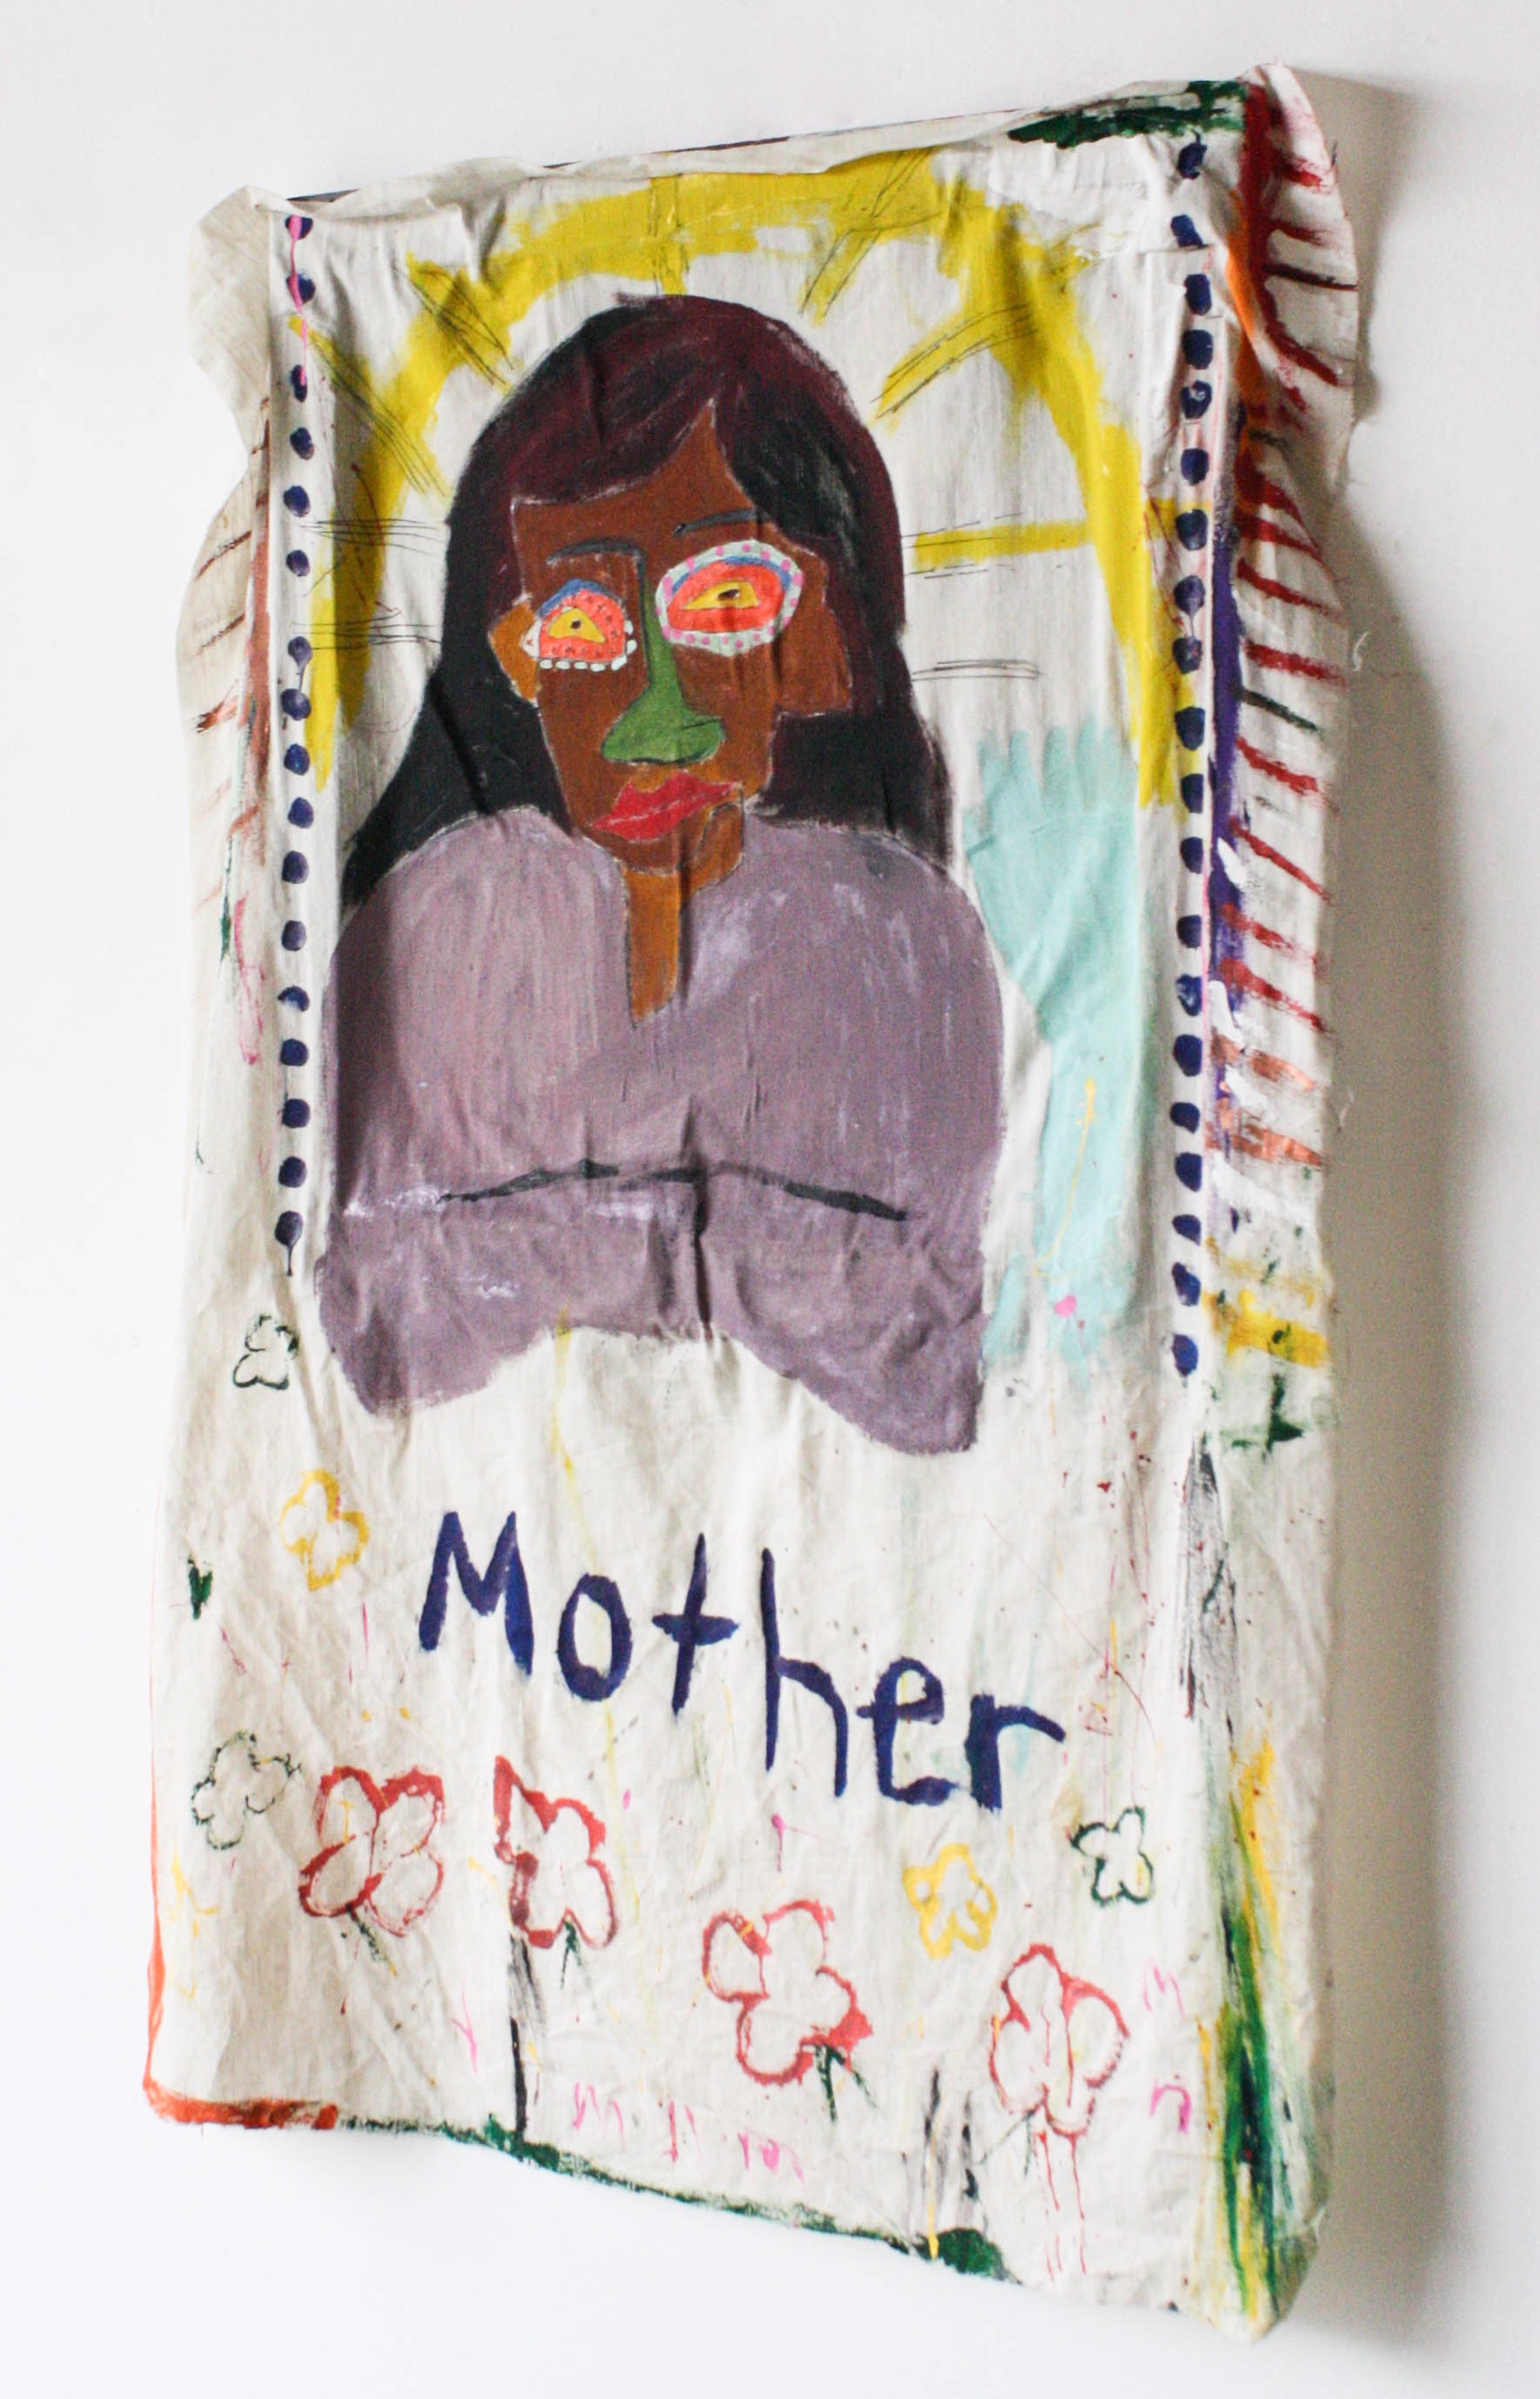 Portrait of My Mother by Marlos E'van